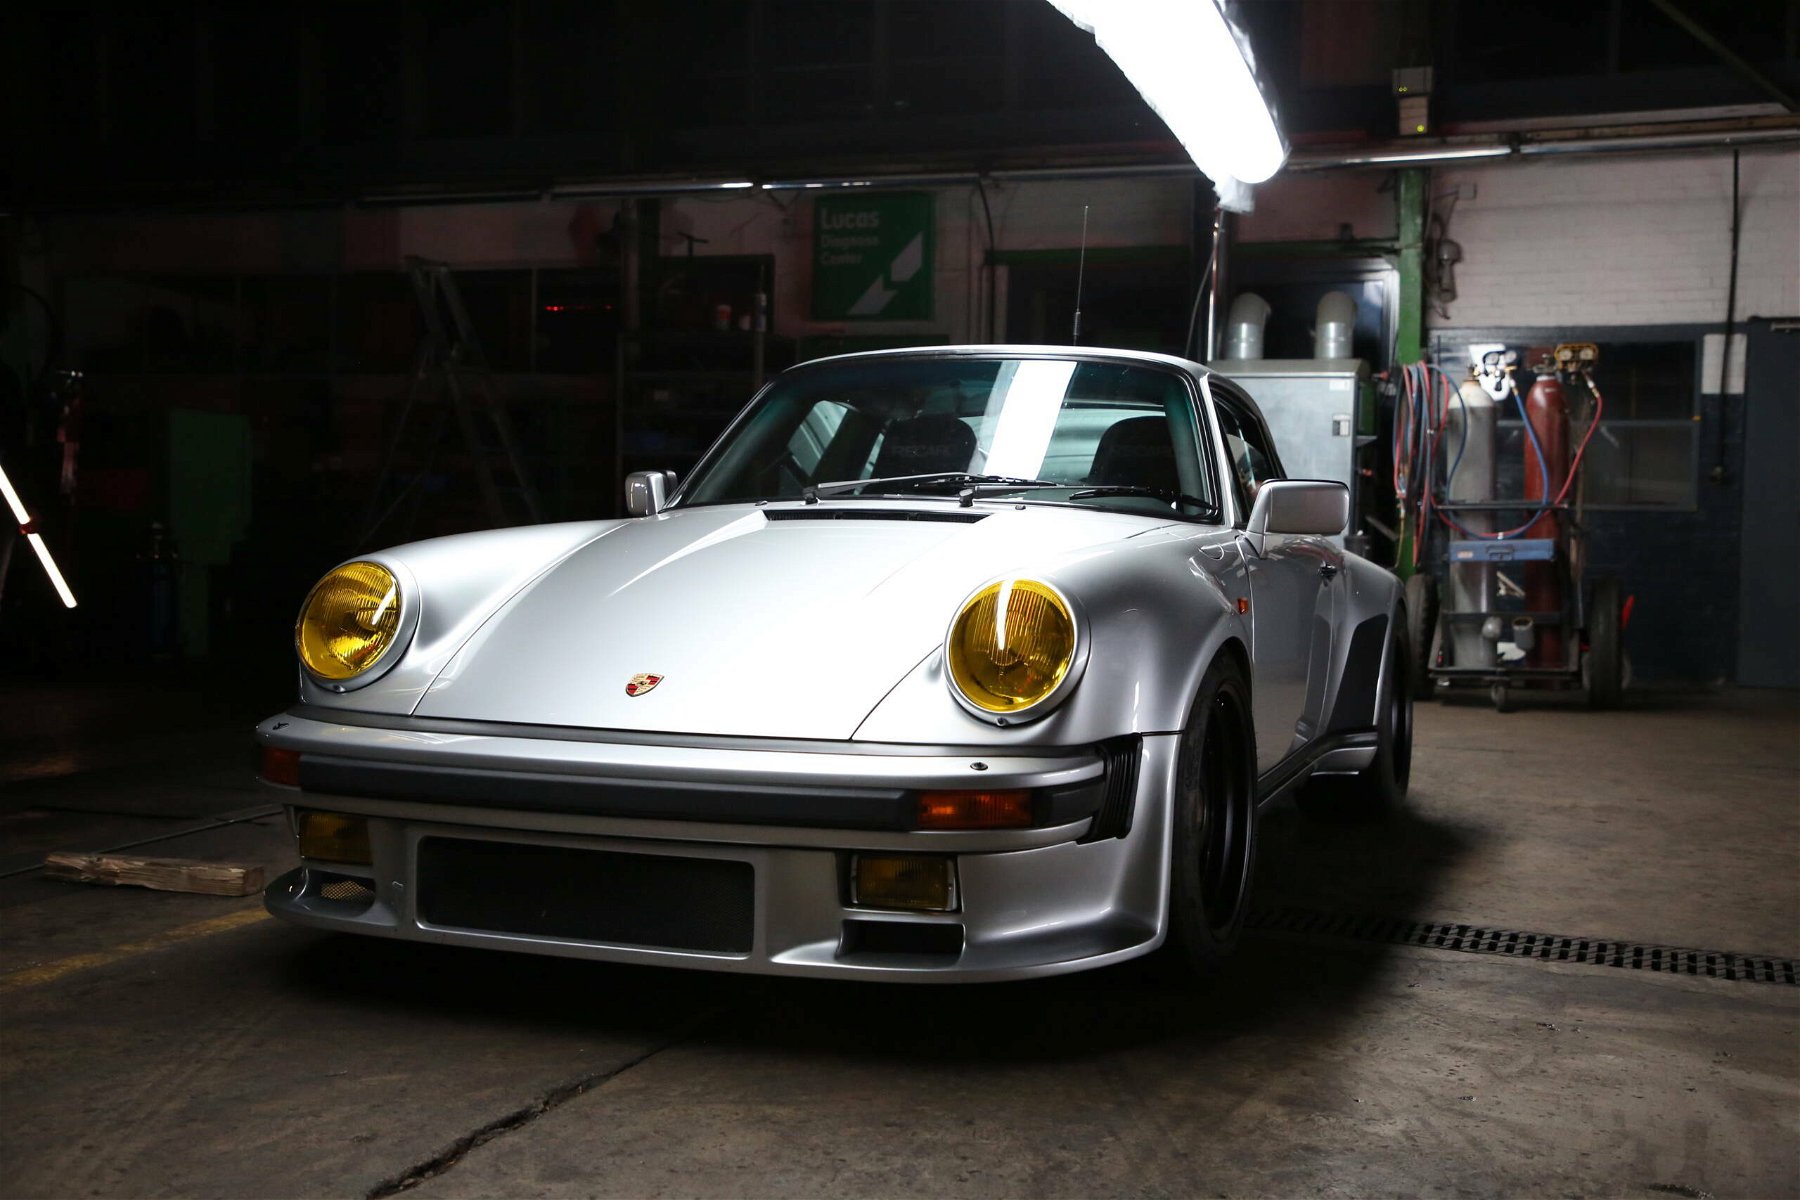 The most exciting Porsches of the past with the quality of today – Turbogarage